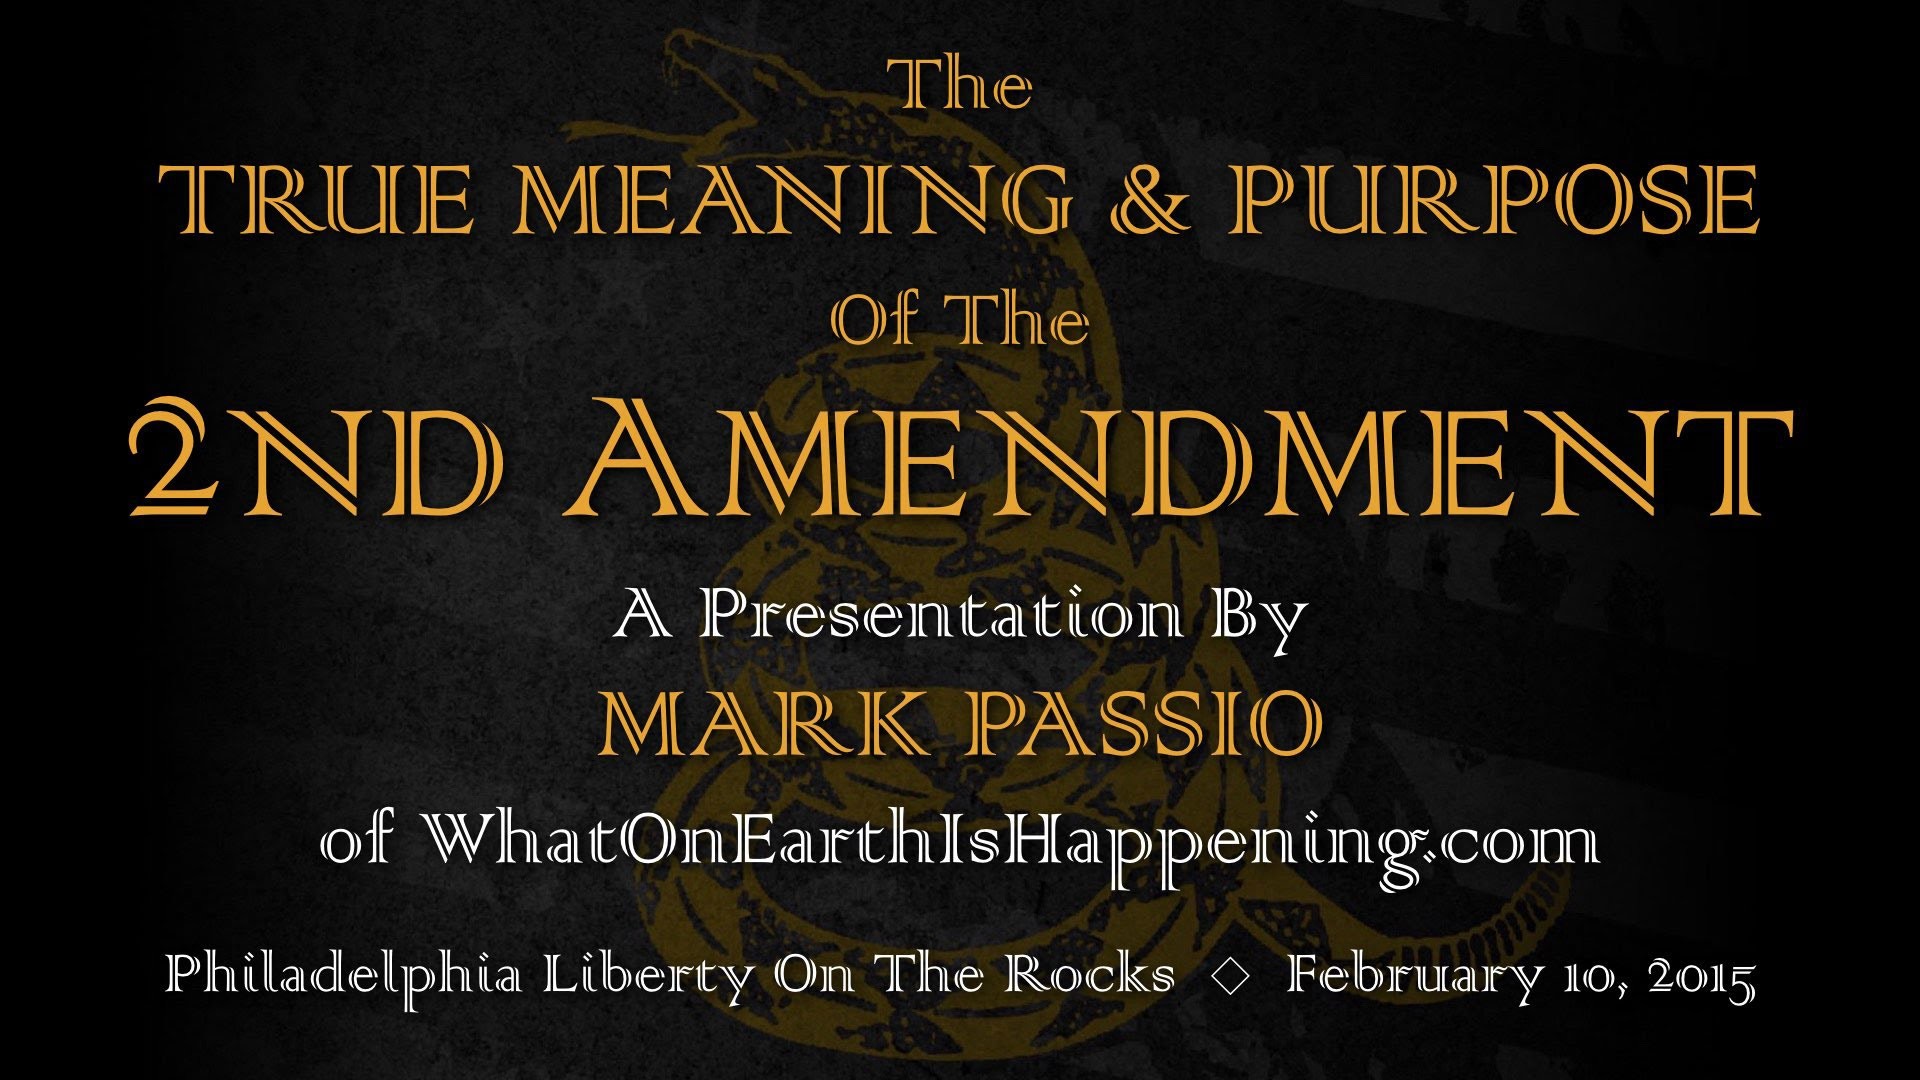 1920x1080 Mark Passio - The True Meaning And Purpose Of The 2nd Amendment - YouTube